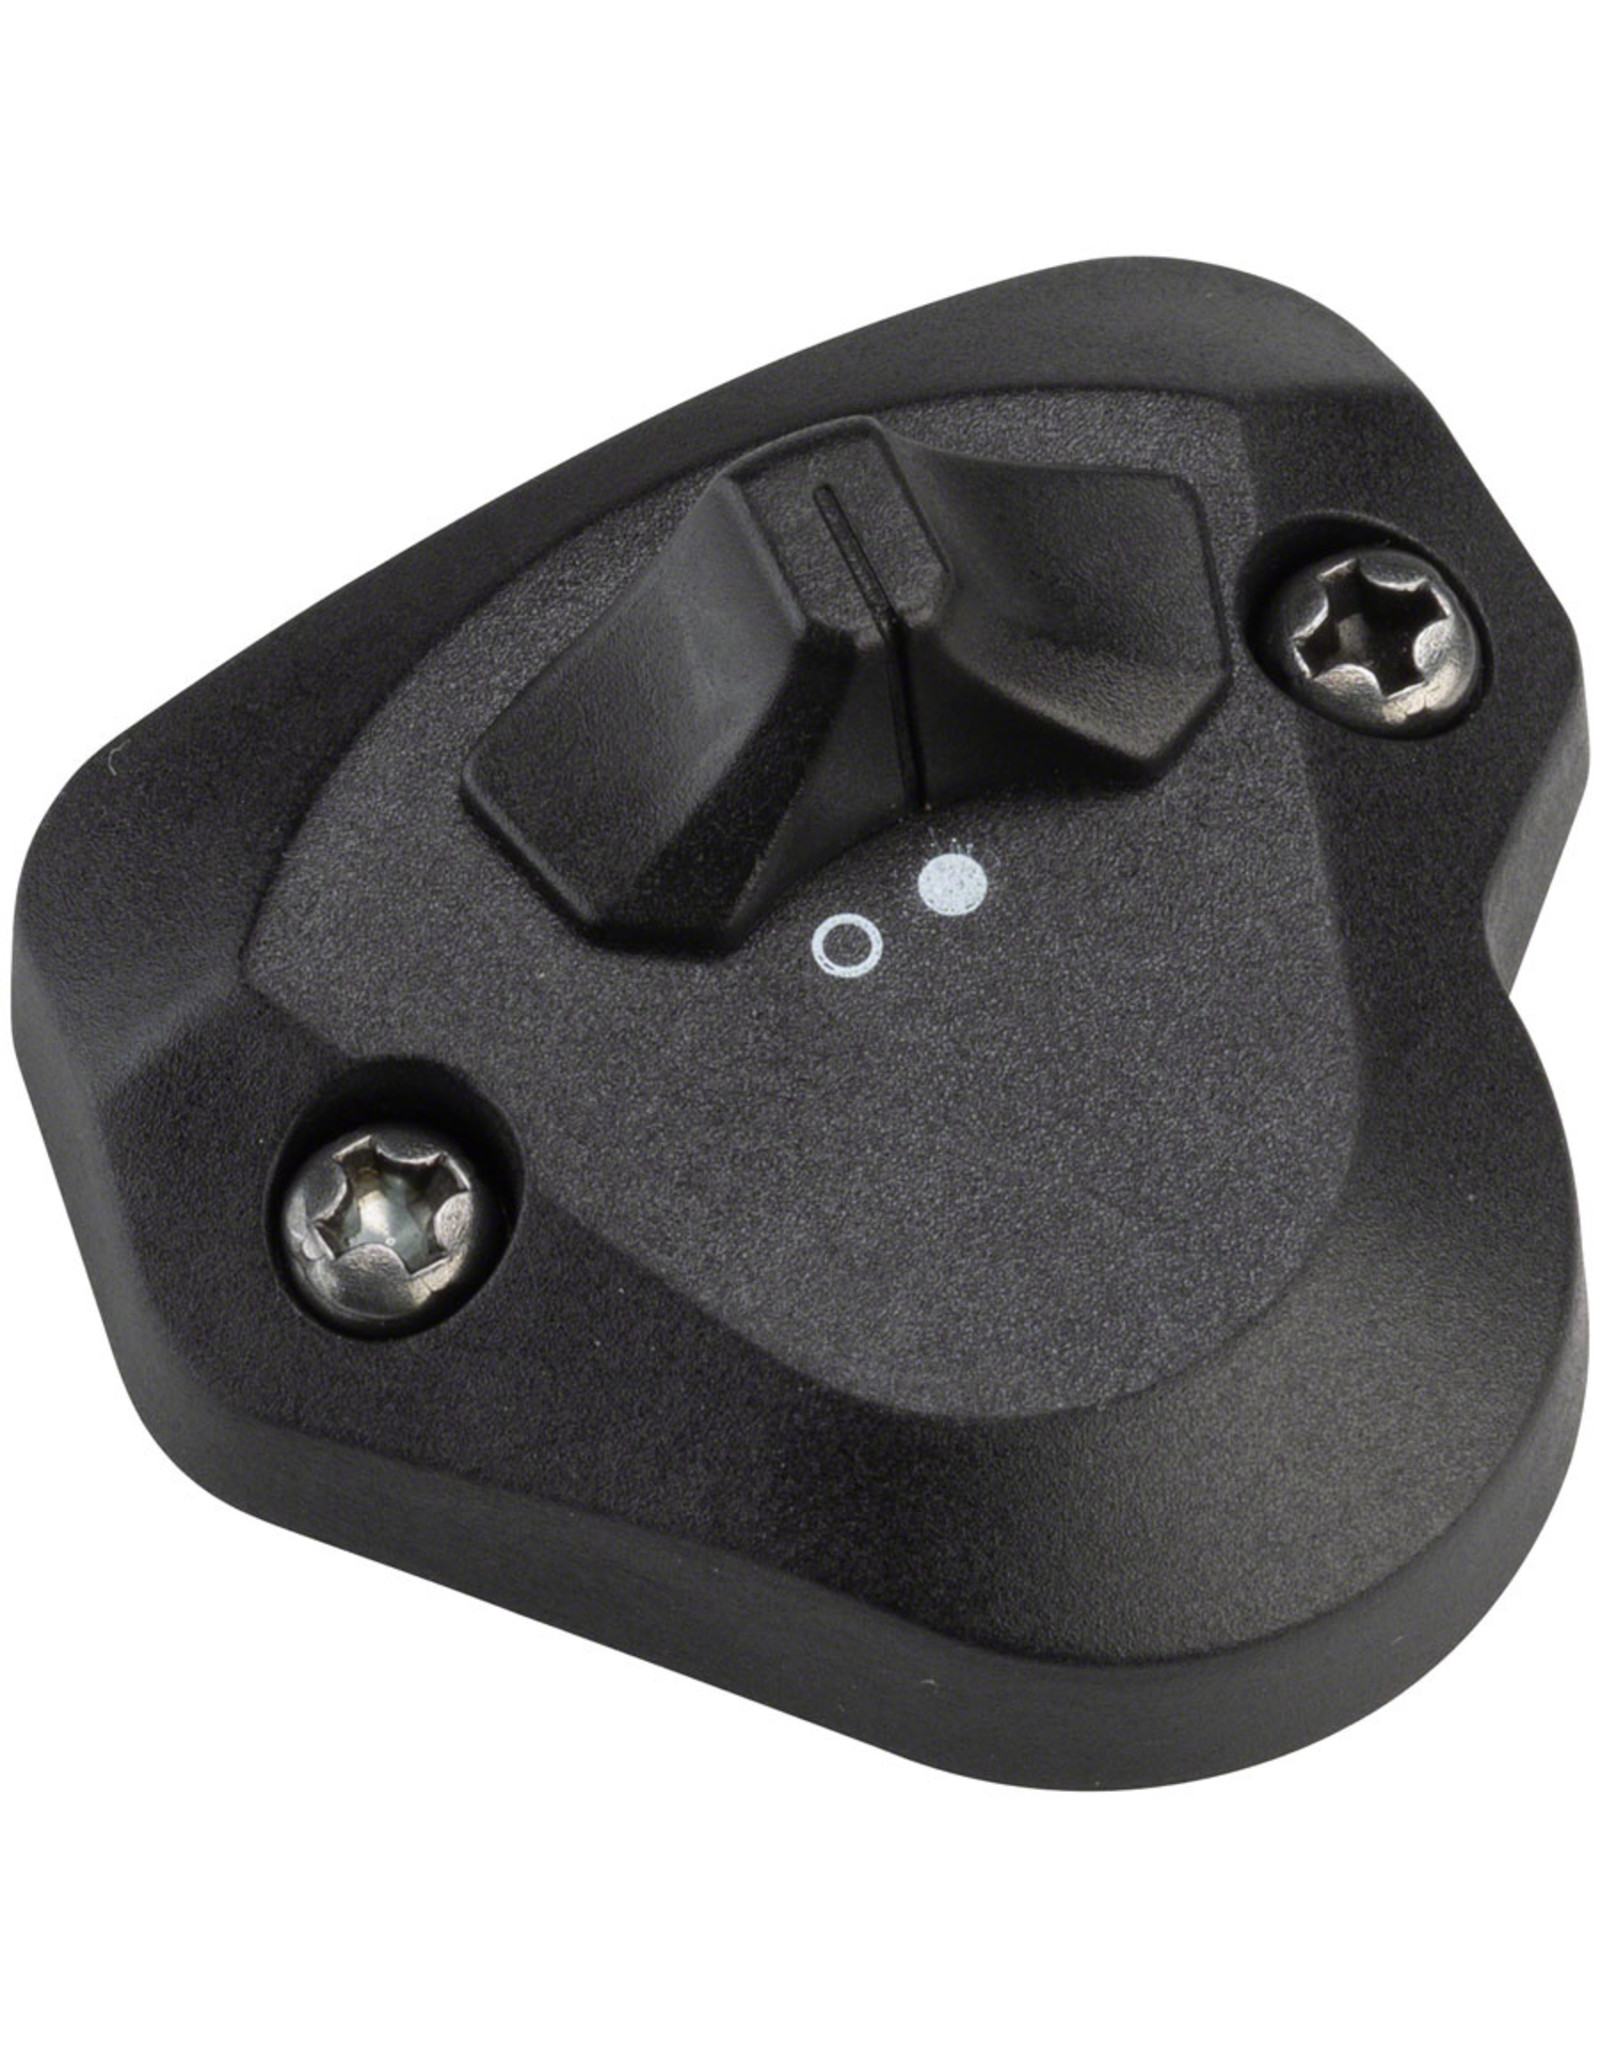 microSHIFT microSHIFT Rear Derailleur Clutch Cover Set Switch And Cap - For M865M, ADVENT, and ADVENT X Rear Derailleurs